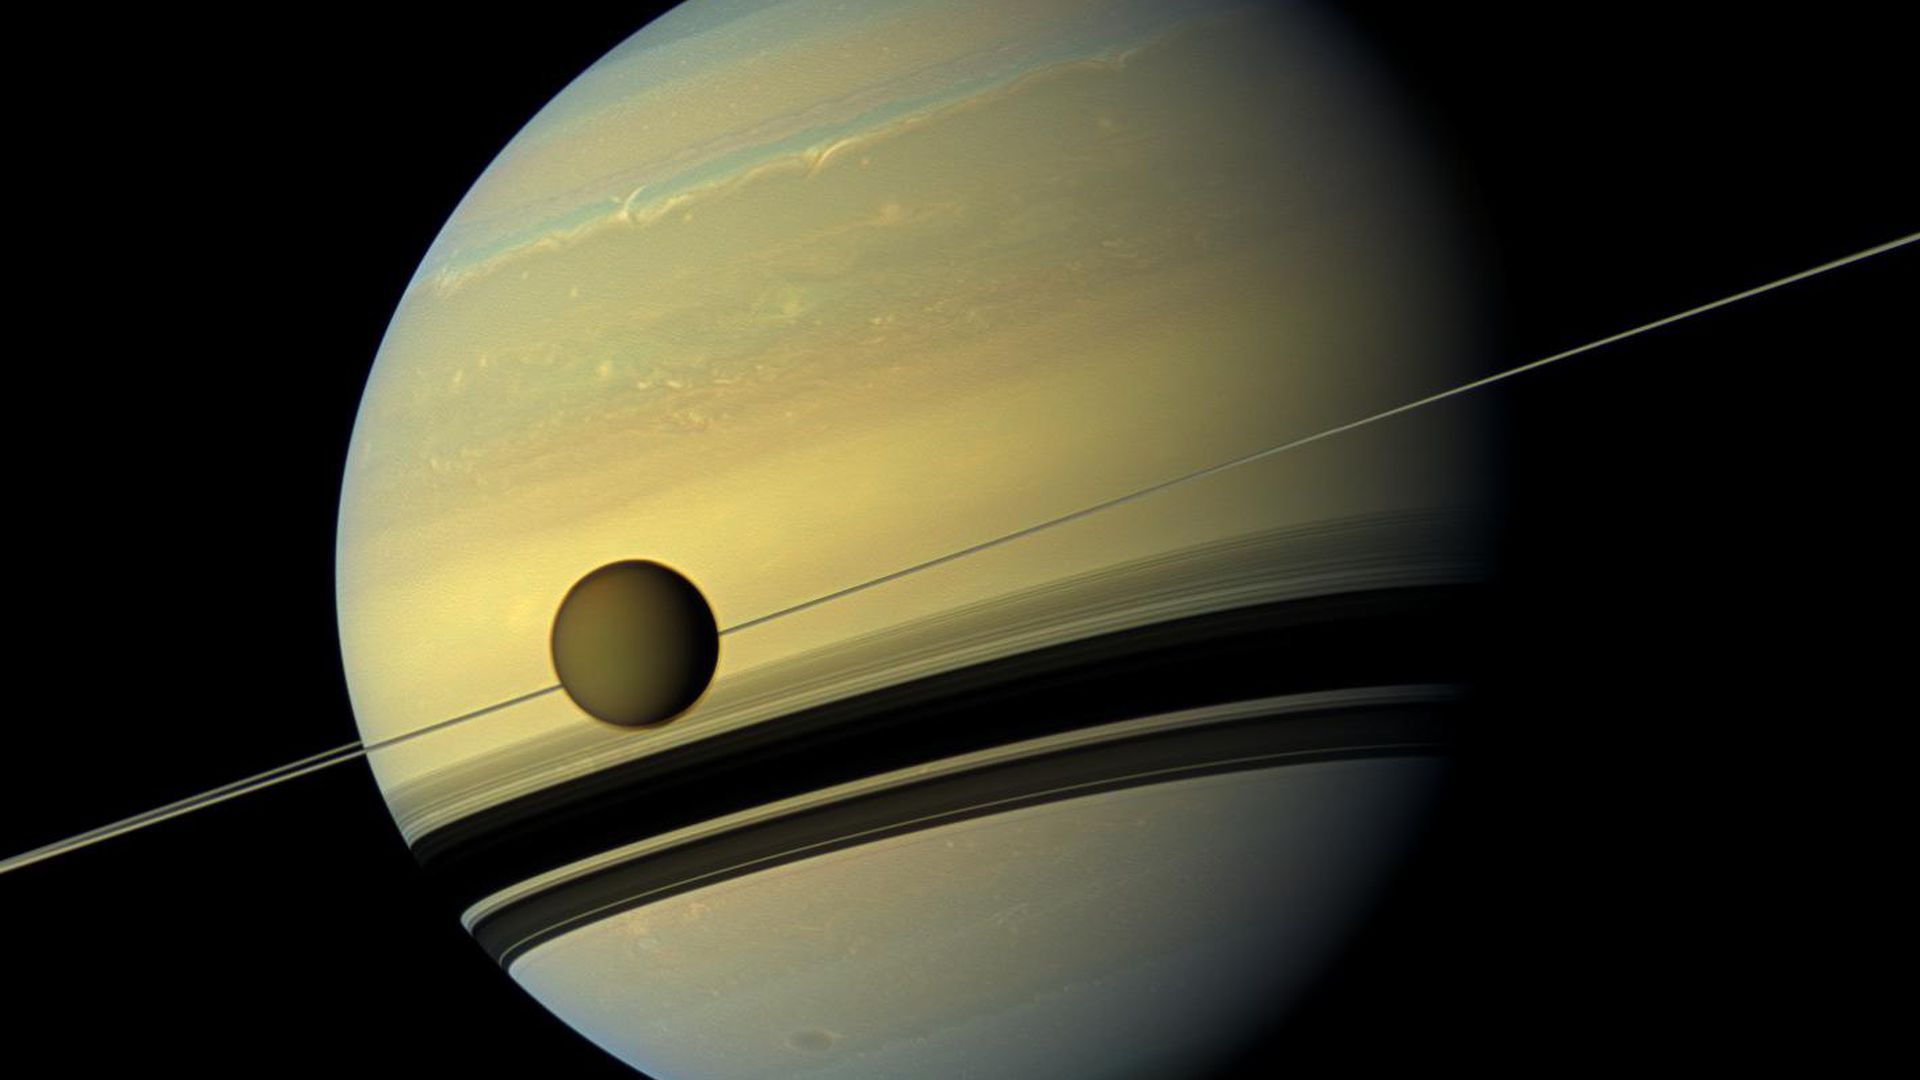 Titan in front of Saturn and its rings.